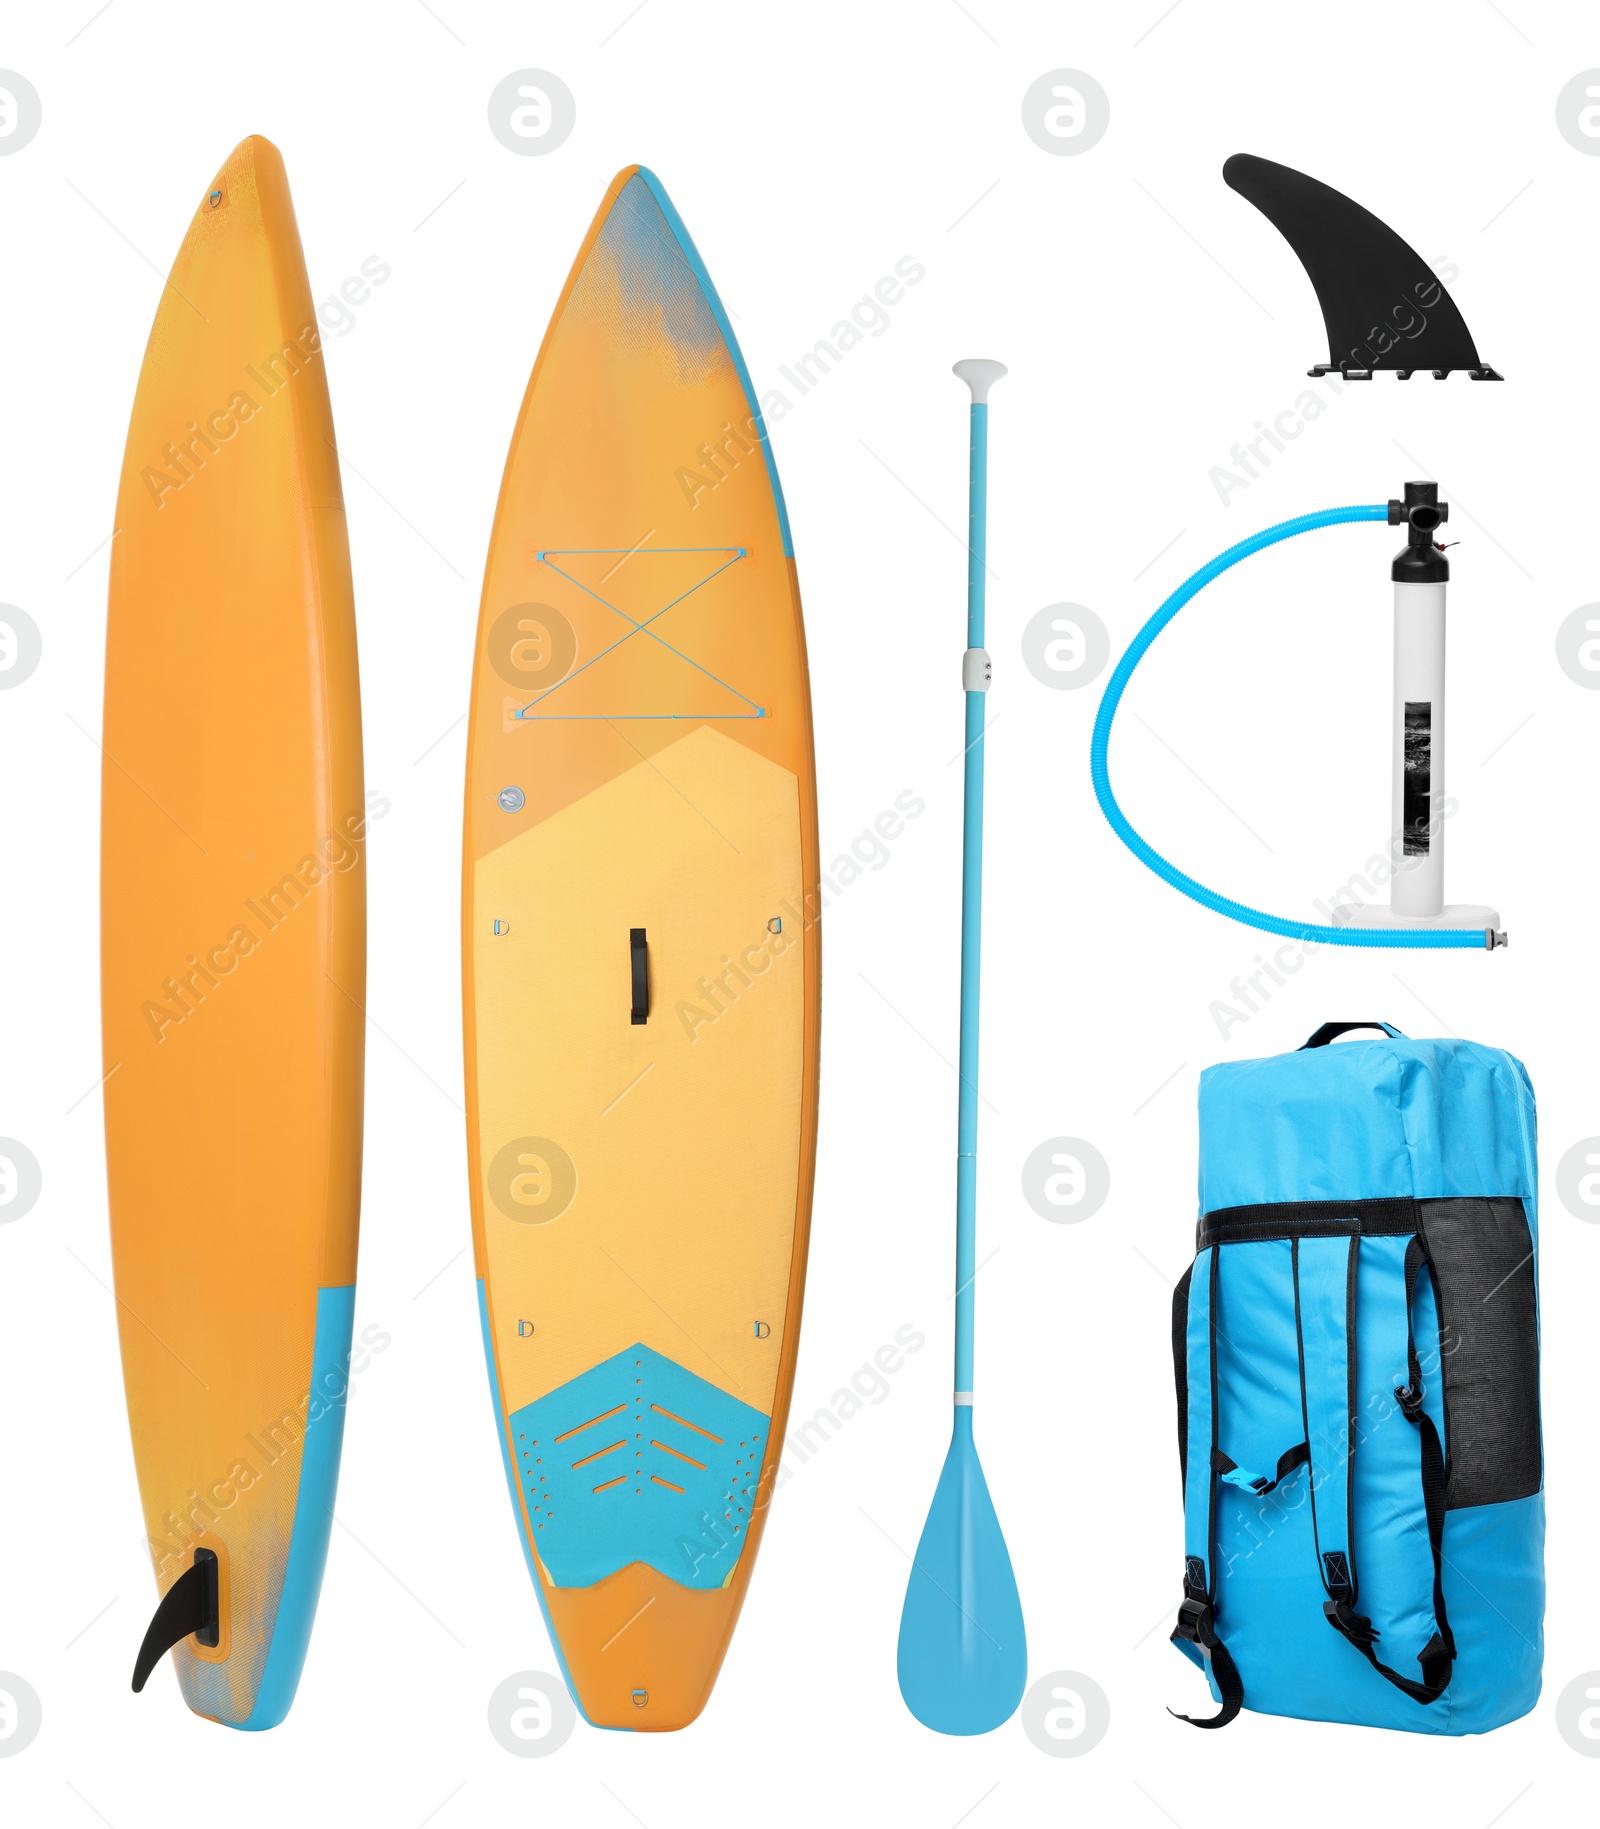 Image of SUP board and different equipment for stand up paddle boarding isolated on white, set